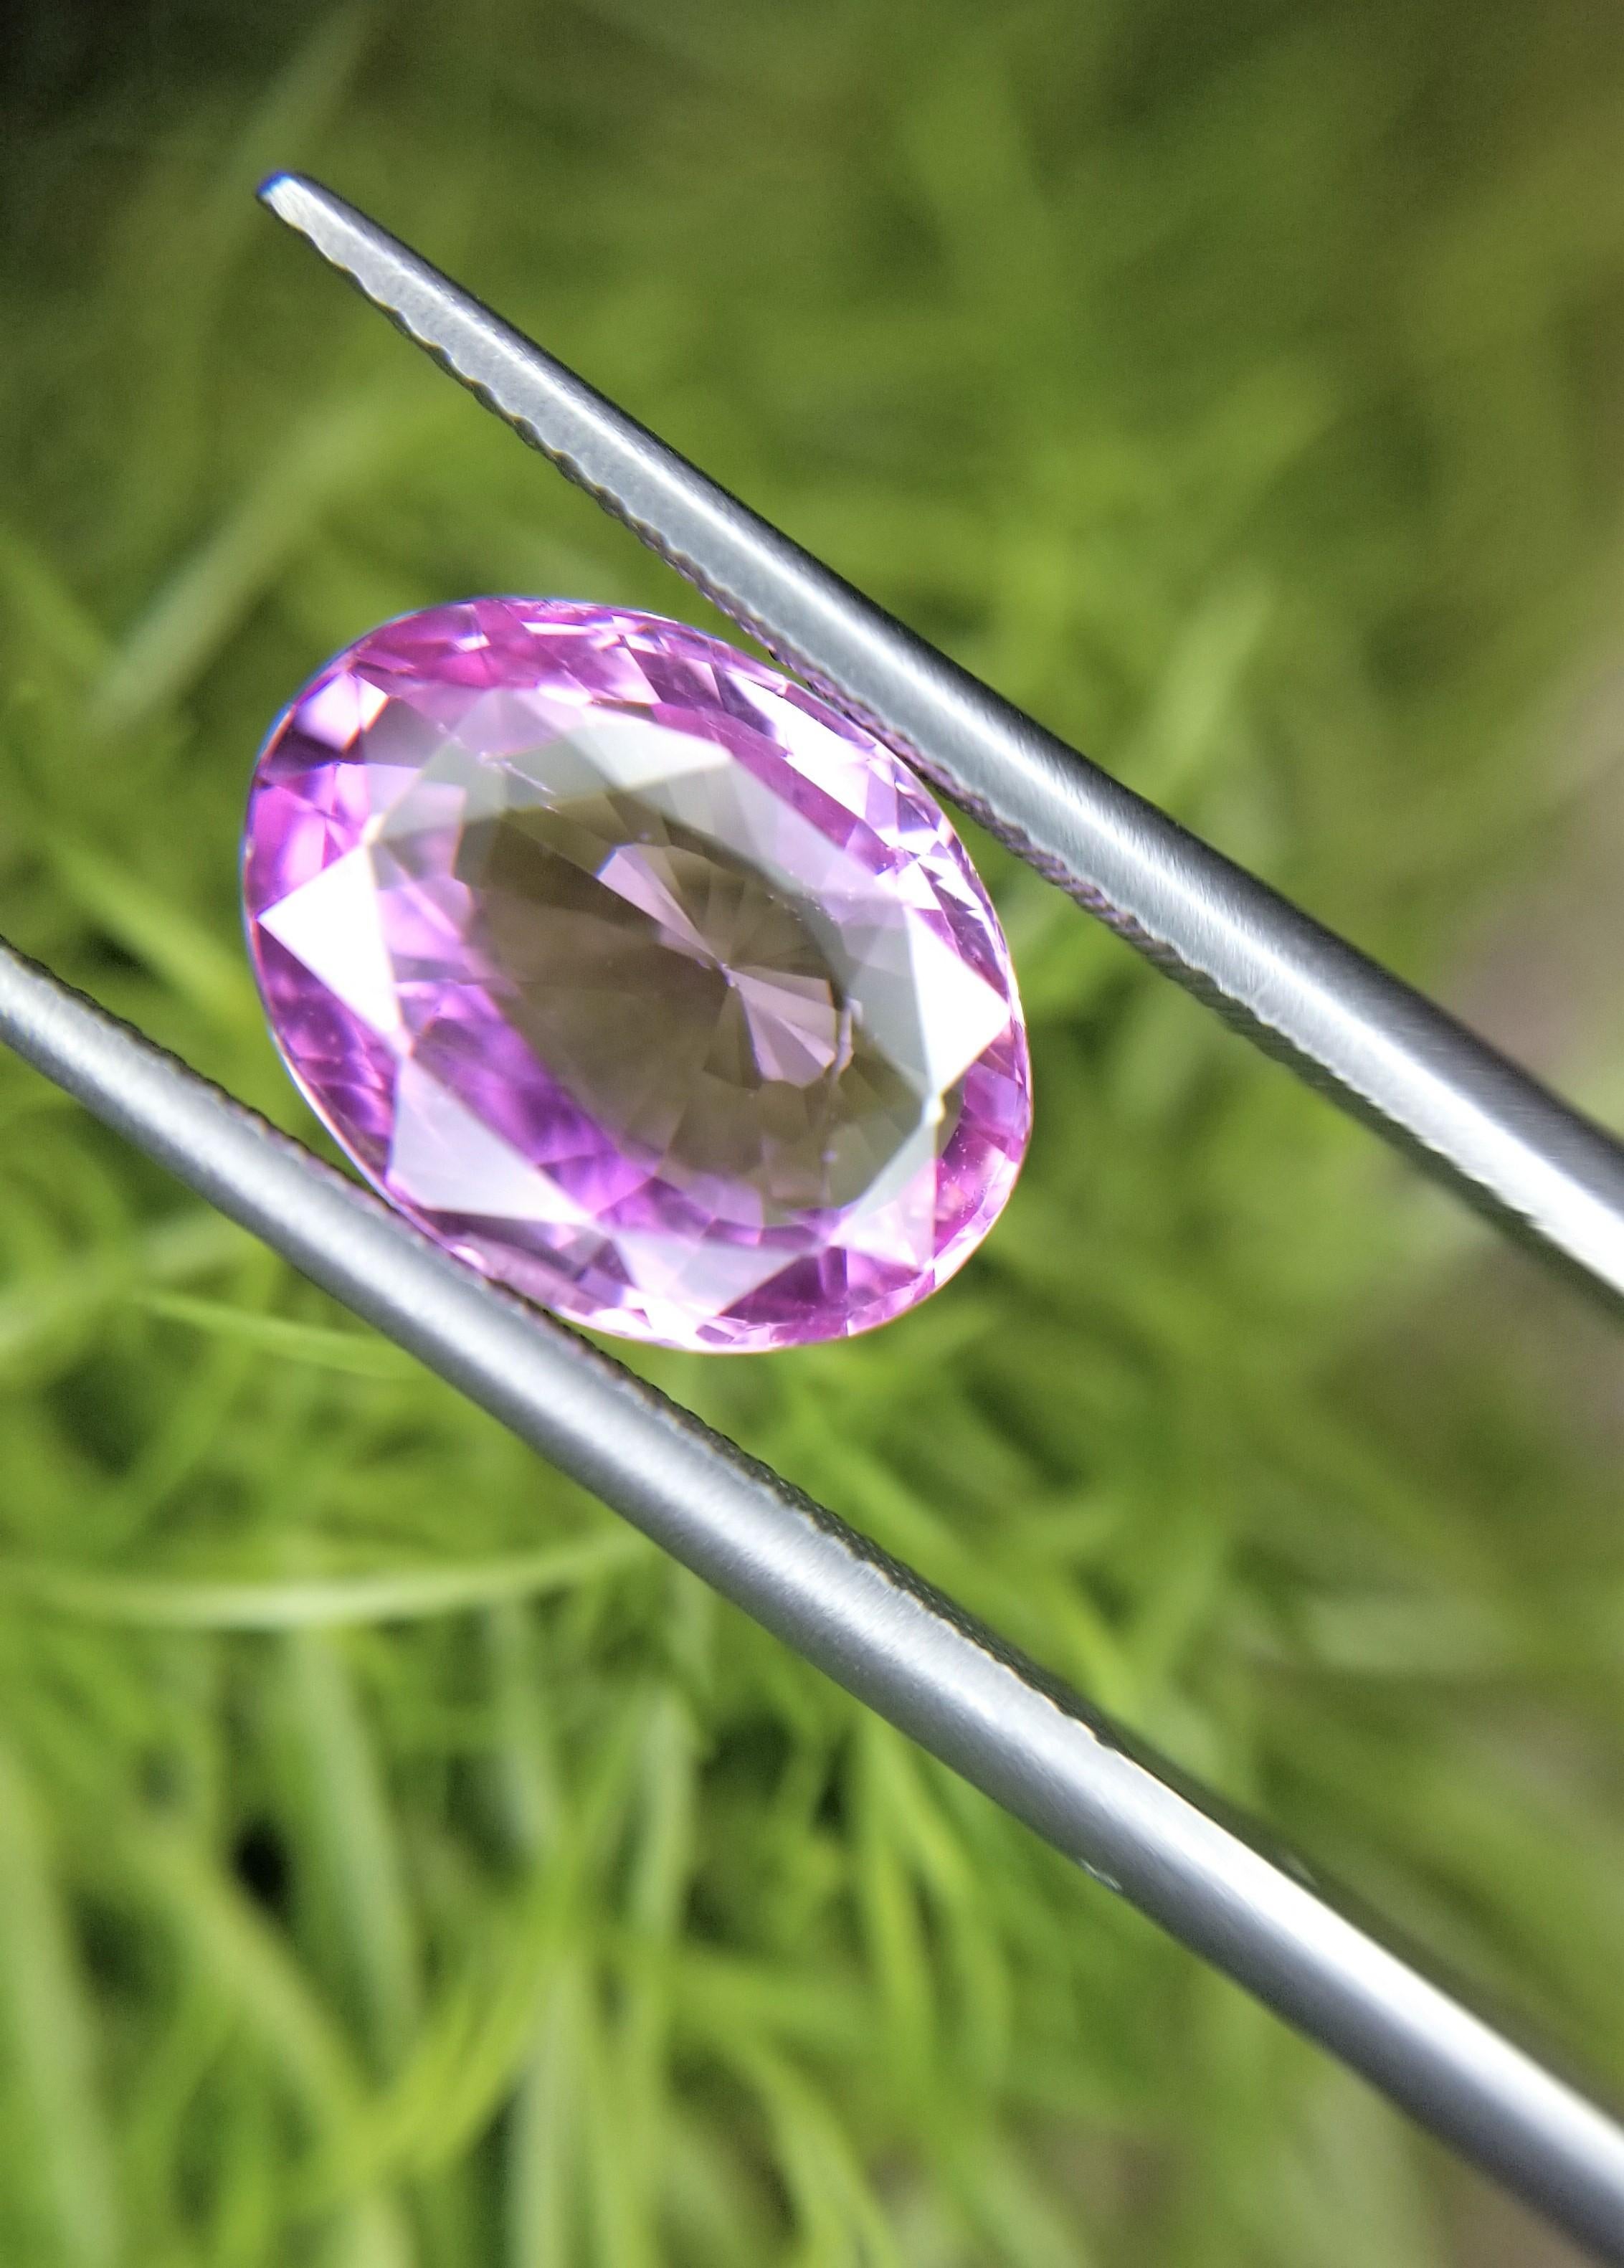 This custom, bezel-set pendant necklace features a gorgeous Berberyn Certified 3.12 Carat Oval Cut PInk sapphire measuring 10.40 x 8.05  mm and can be made in 18K Rose Gold, 18K Yellow Gold or 18K White Gold.
Pink sapphires have been exponentially